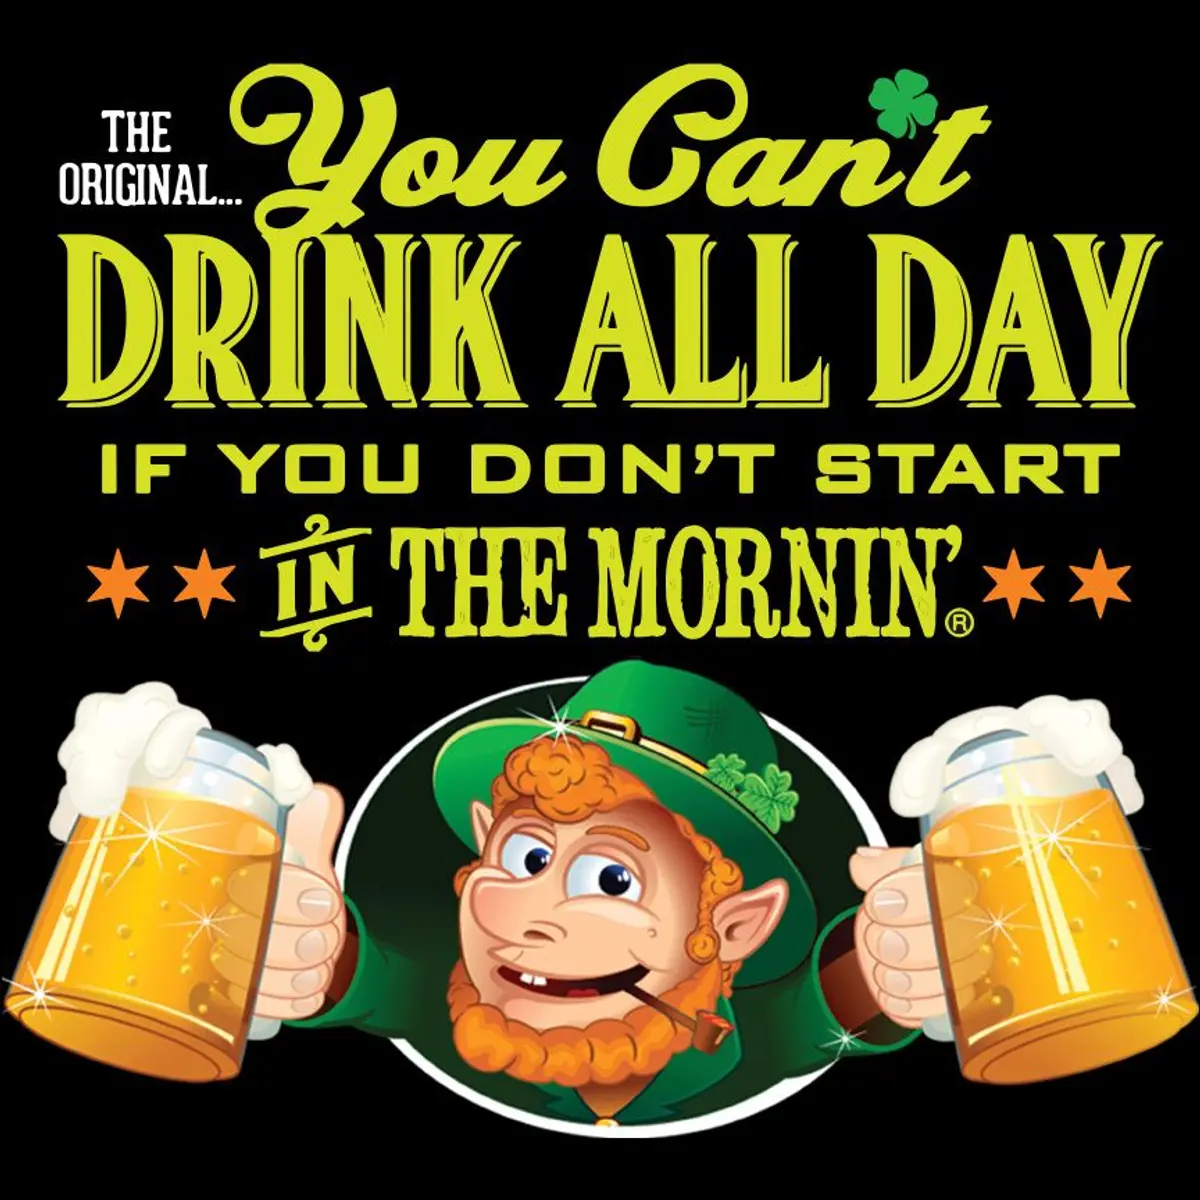 ST PATRICK'S DAY PARTY #YCDAD at CAROL'S PUB Chicago 11AM-3PM